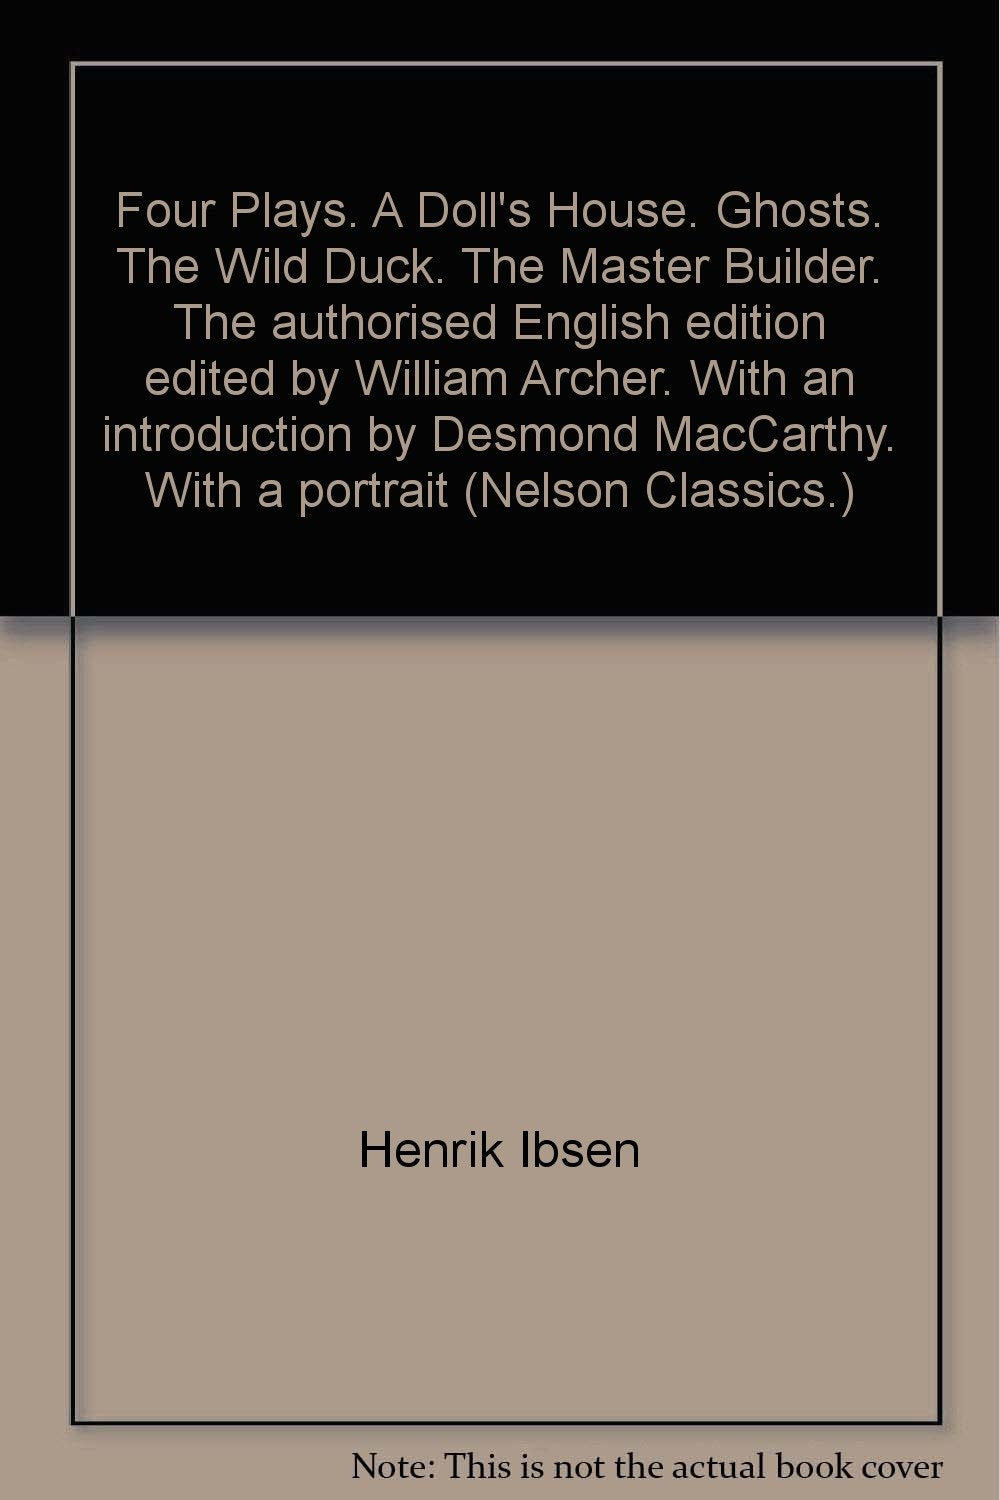 Four Plays. A Doll's House. Ghosts. The Wild Duck. The Master Builder. The authorised English edition edited by William Archer. With an introduction by Desmond MacCarthy. With a portrait (Nelson Classics.) [Unknown Binding] Henrik Ibsen; William Archer an